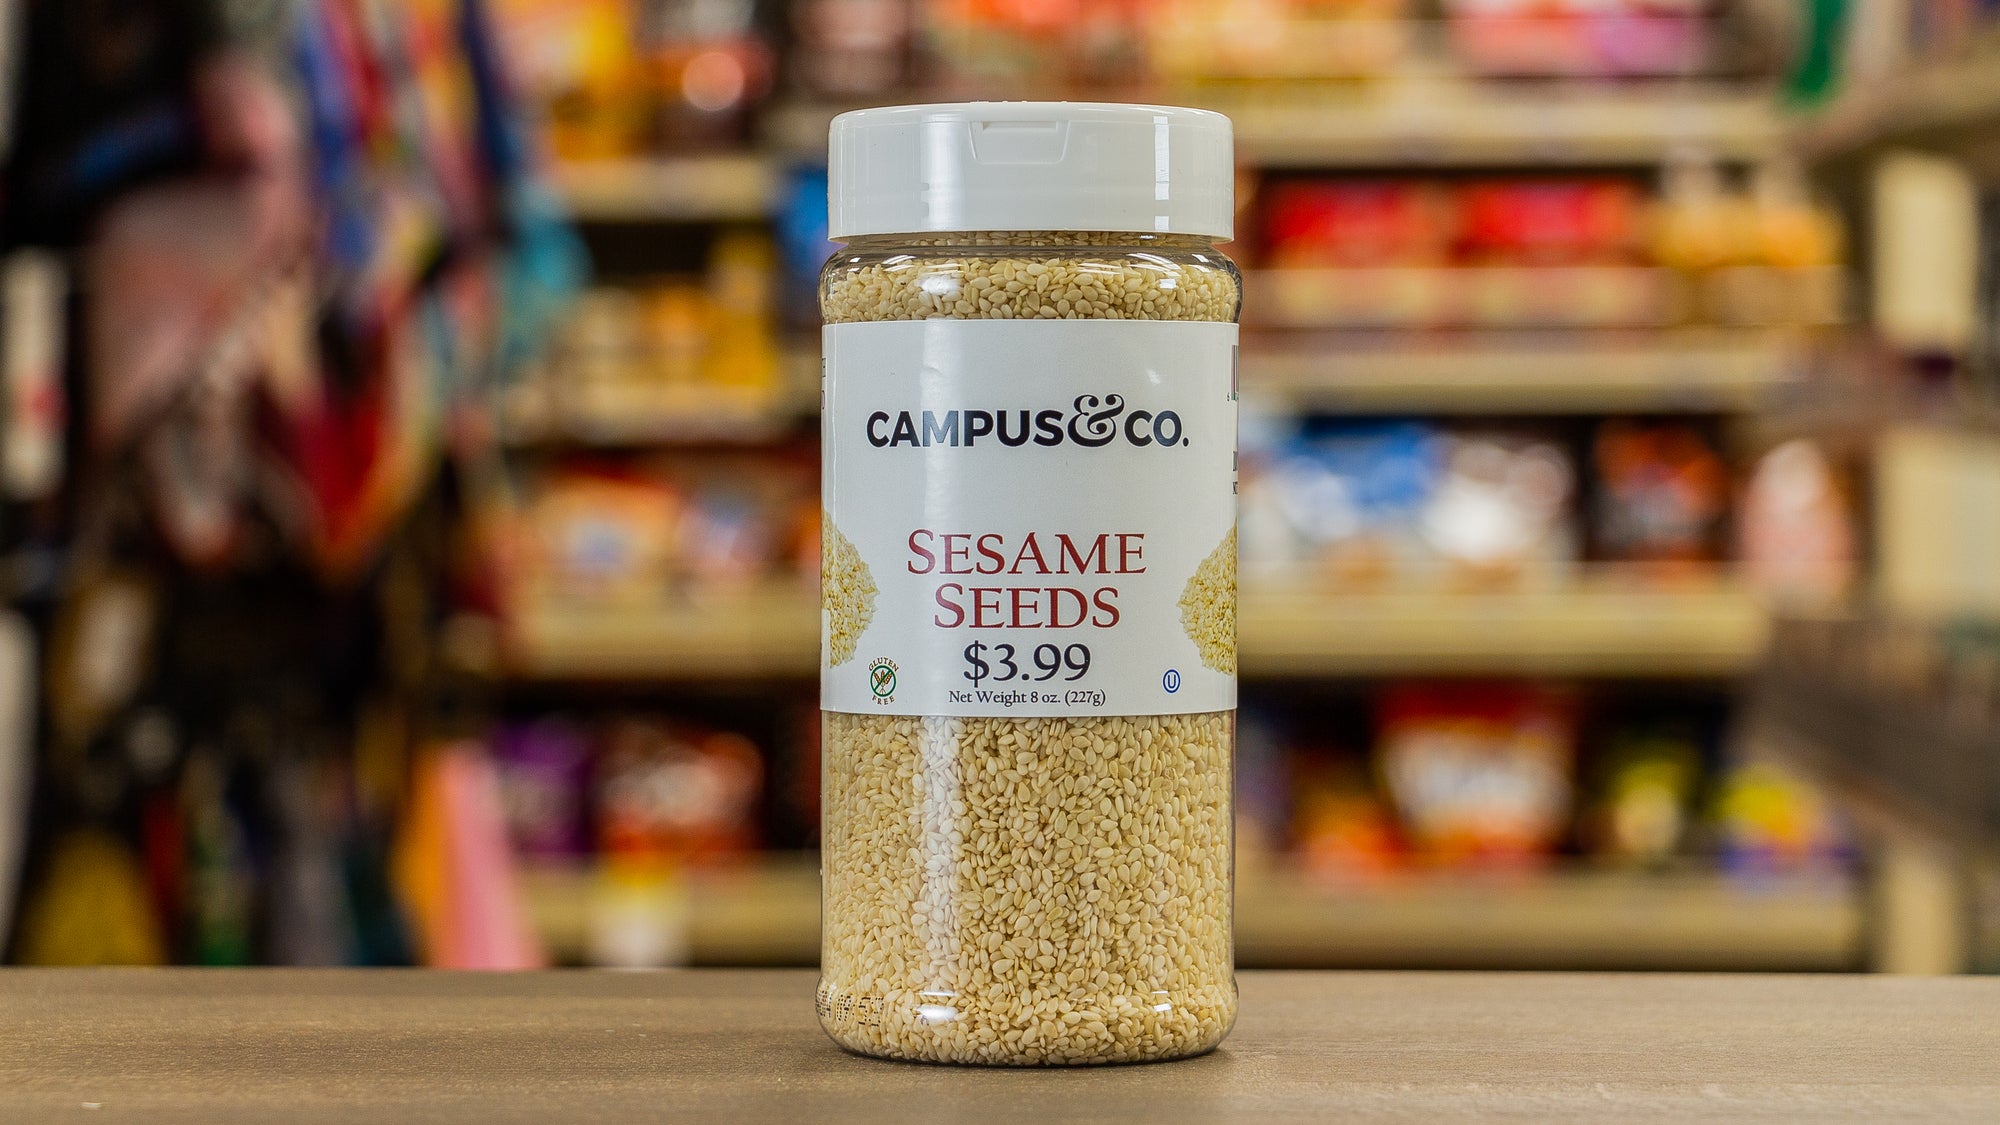 Campus&Co. Sesame Seed 8oz